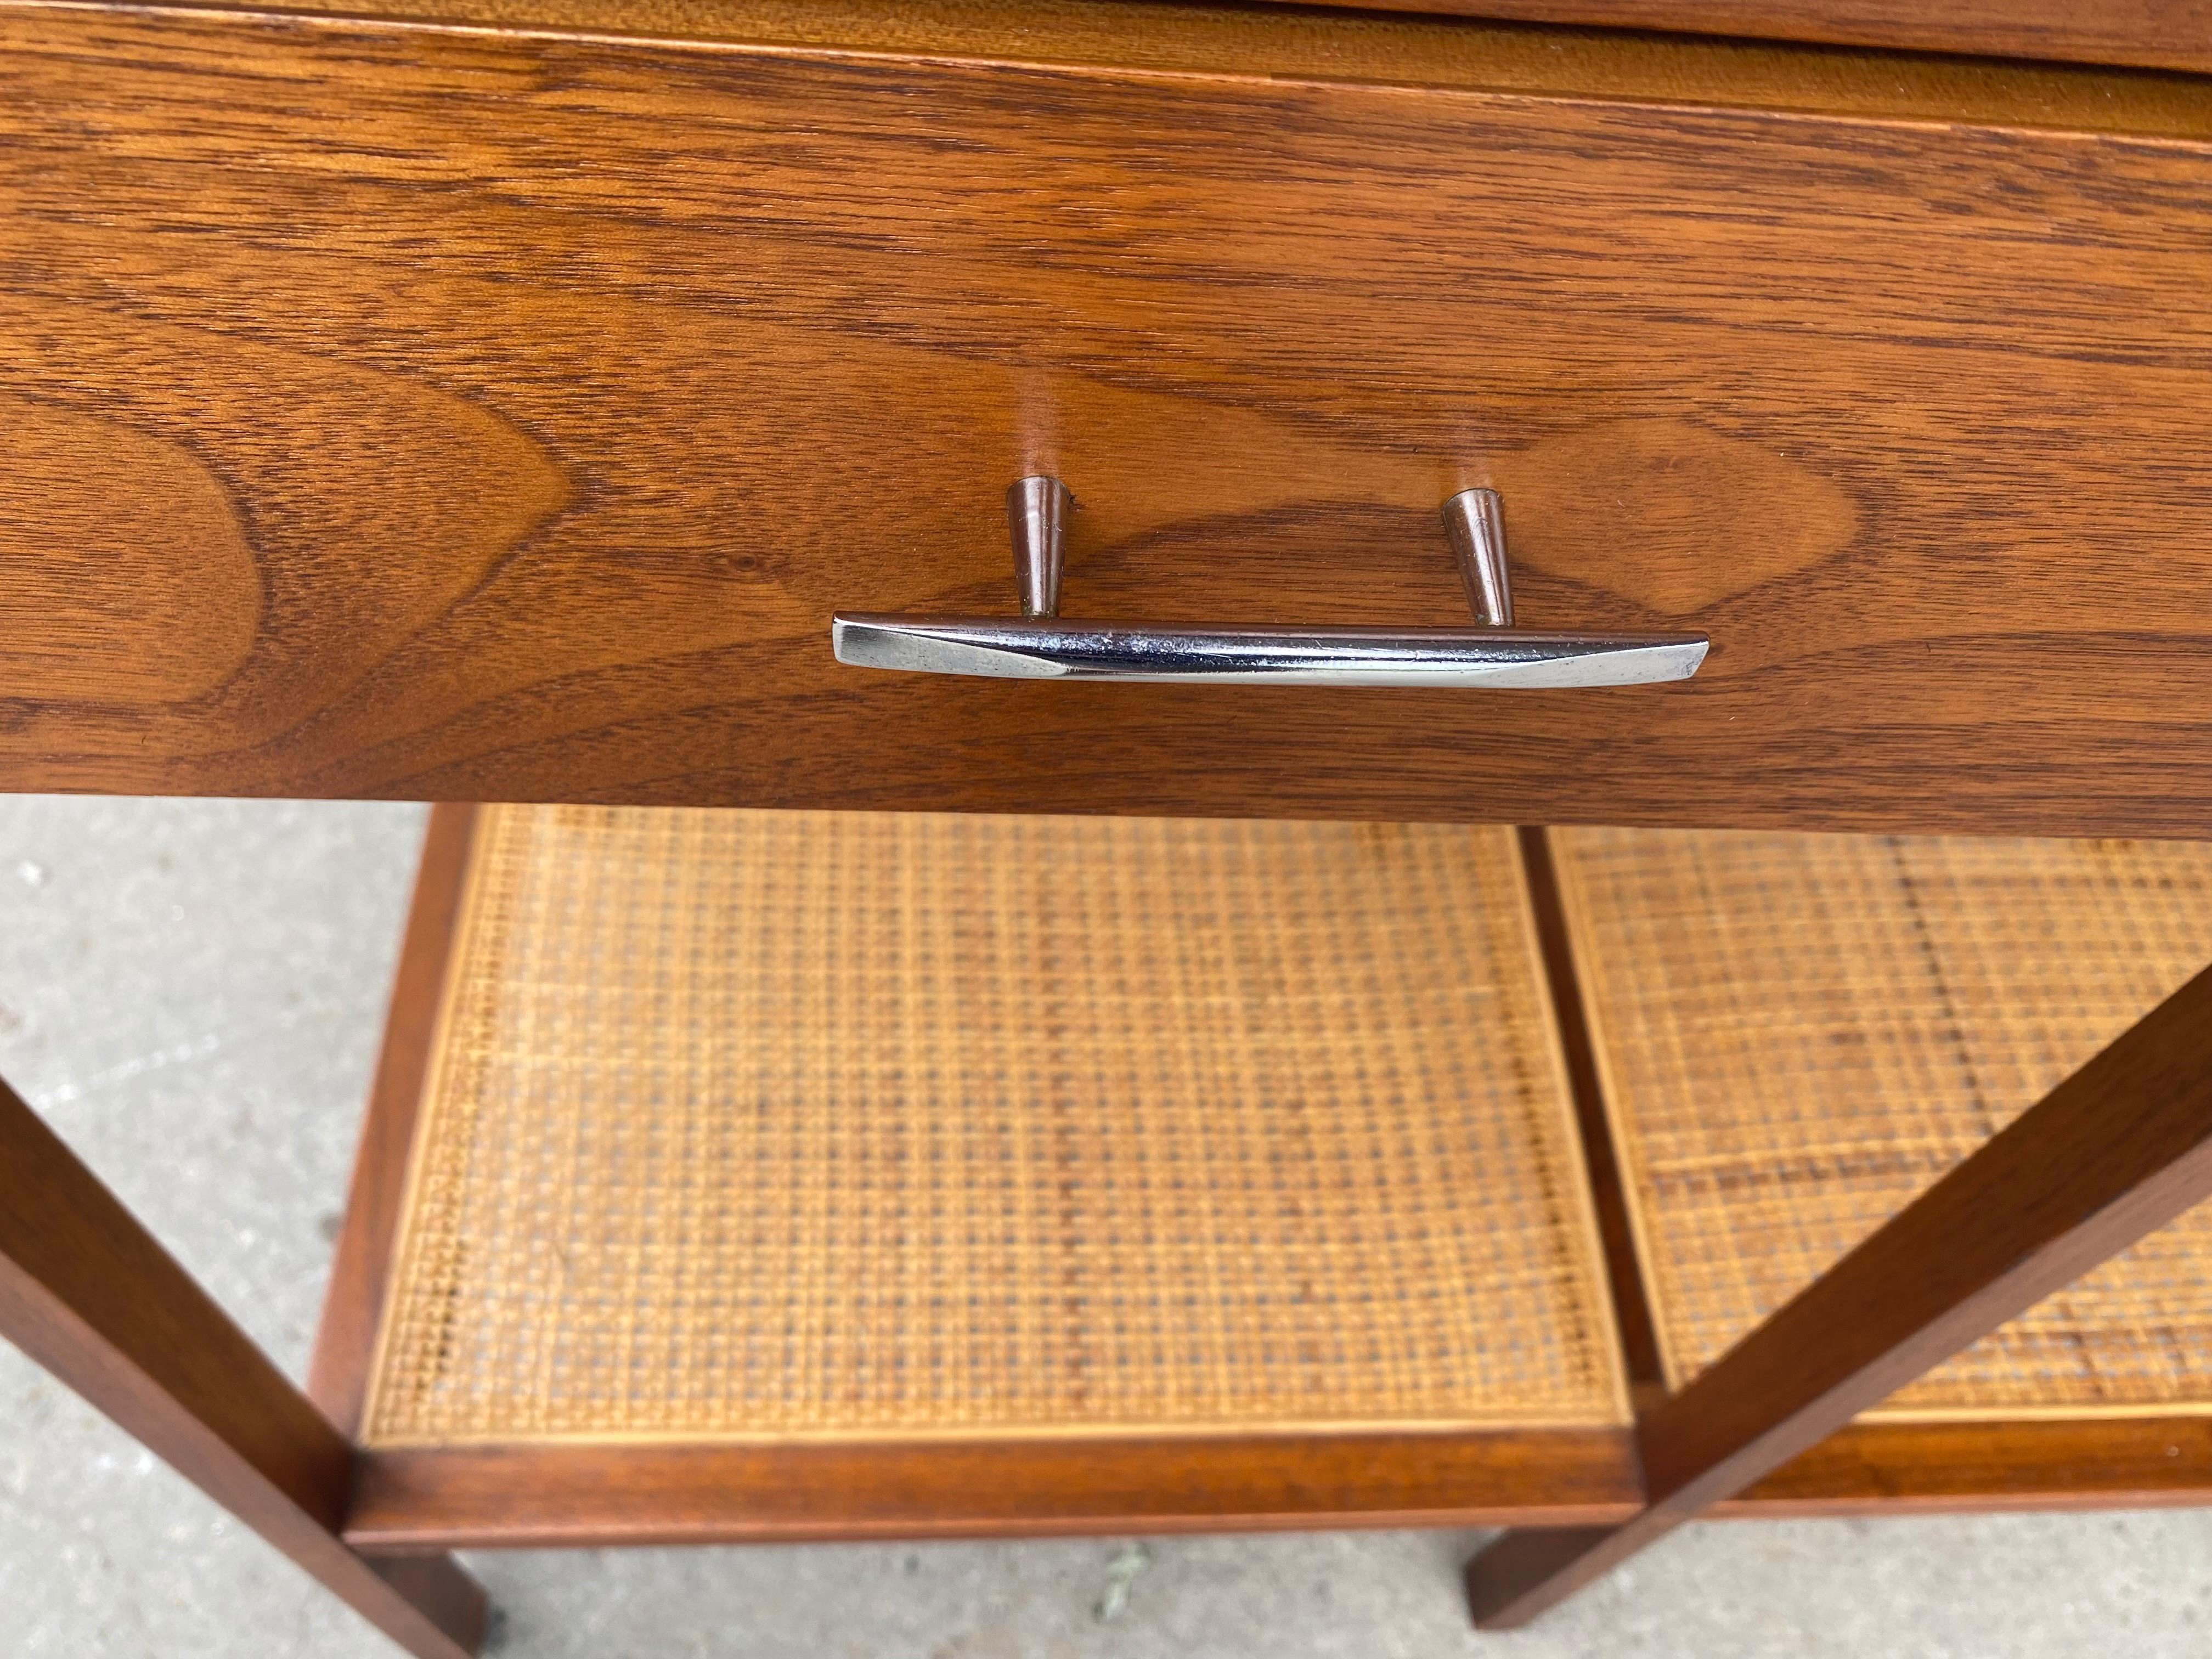 A Paul McCobb design for Lane, from his Delineator line.
This is the rare console table, stunning walnut with rosewood, richly grained, book matched, three drawers and a cane lower shelf.
Amazing original condition, retains origin label. As well